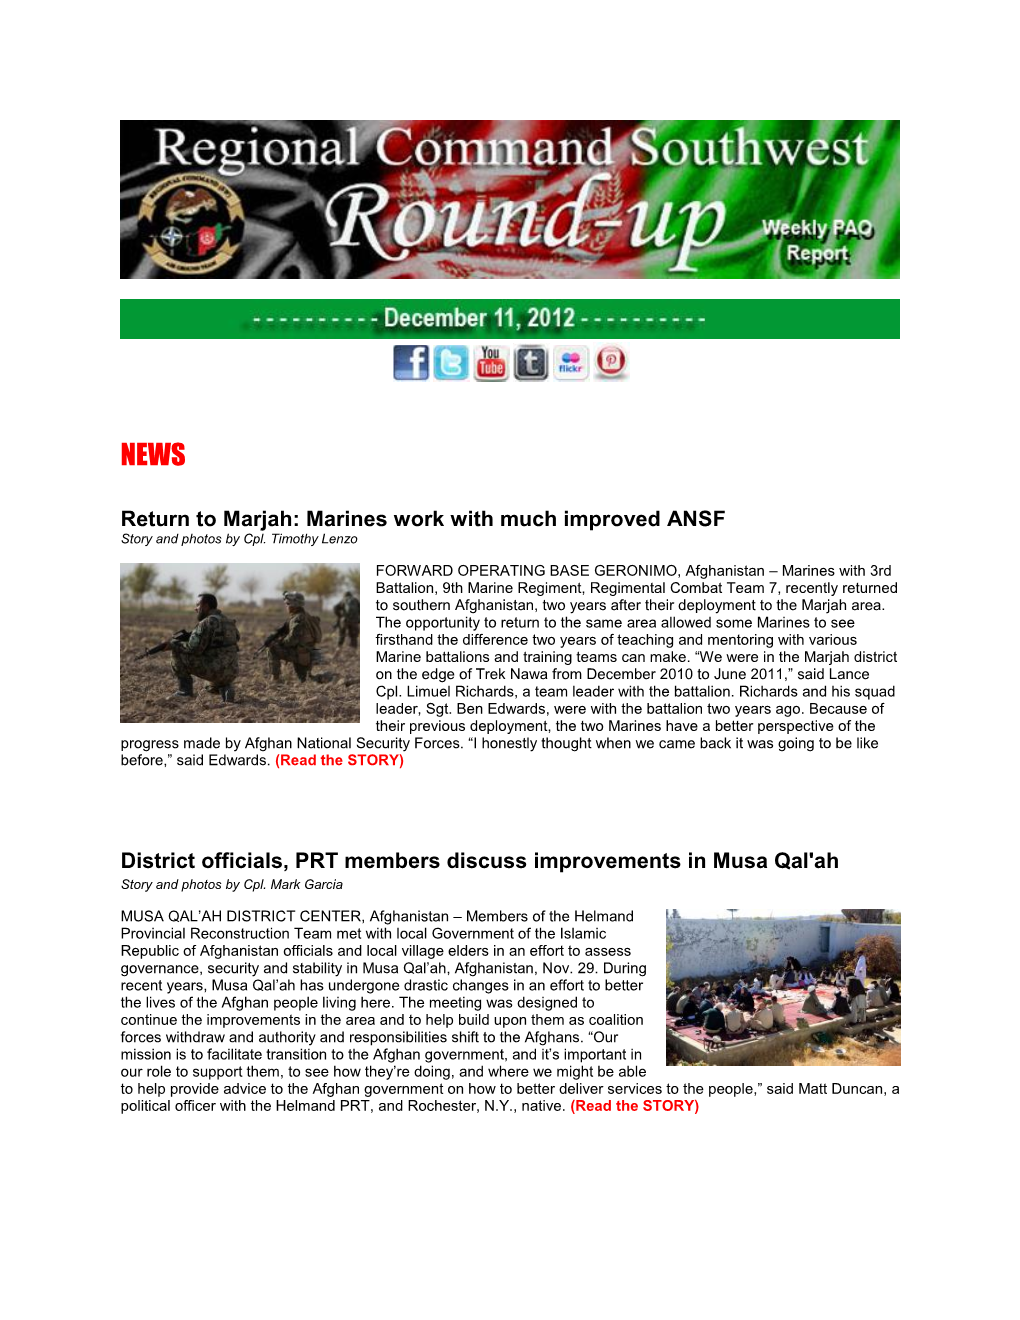 Marjah: Marines Work with Much Improved ANSF Story and Photos by Cpl